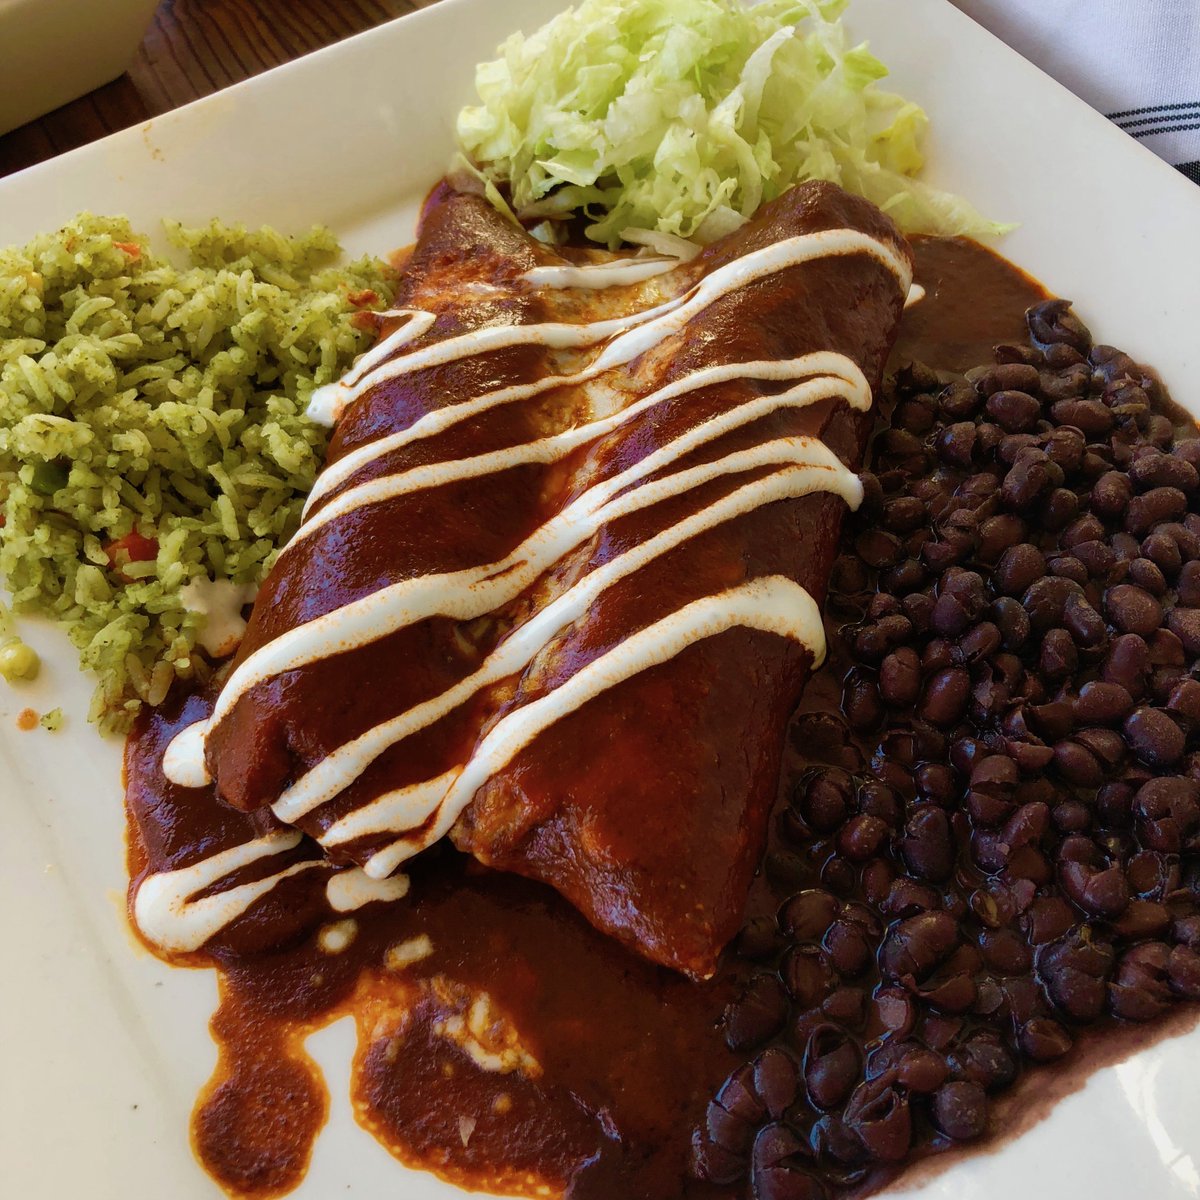 Our Enchiladas Rojas, served with arroz verde and frijoles de la olla, are a great remedy for this cold and rainy day. Come on down and give them a try! #lunamex #mexicanfood #clean #authentic #local #sanjose #enchilladas #glutenfree